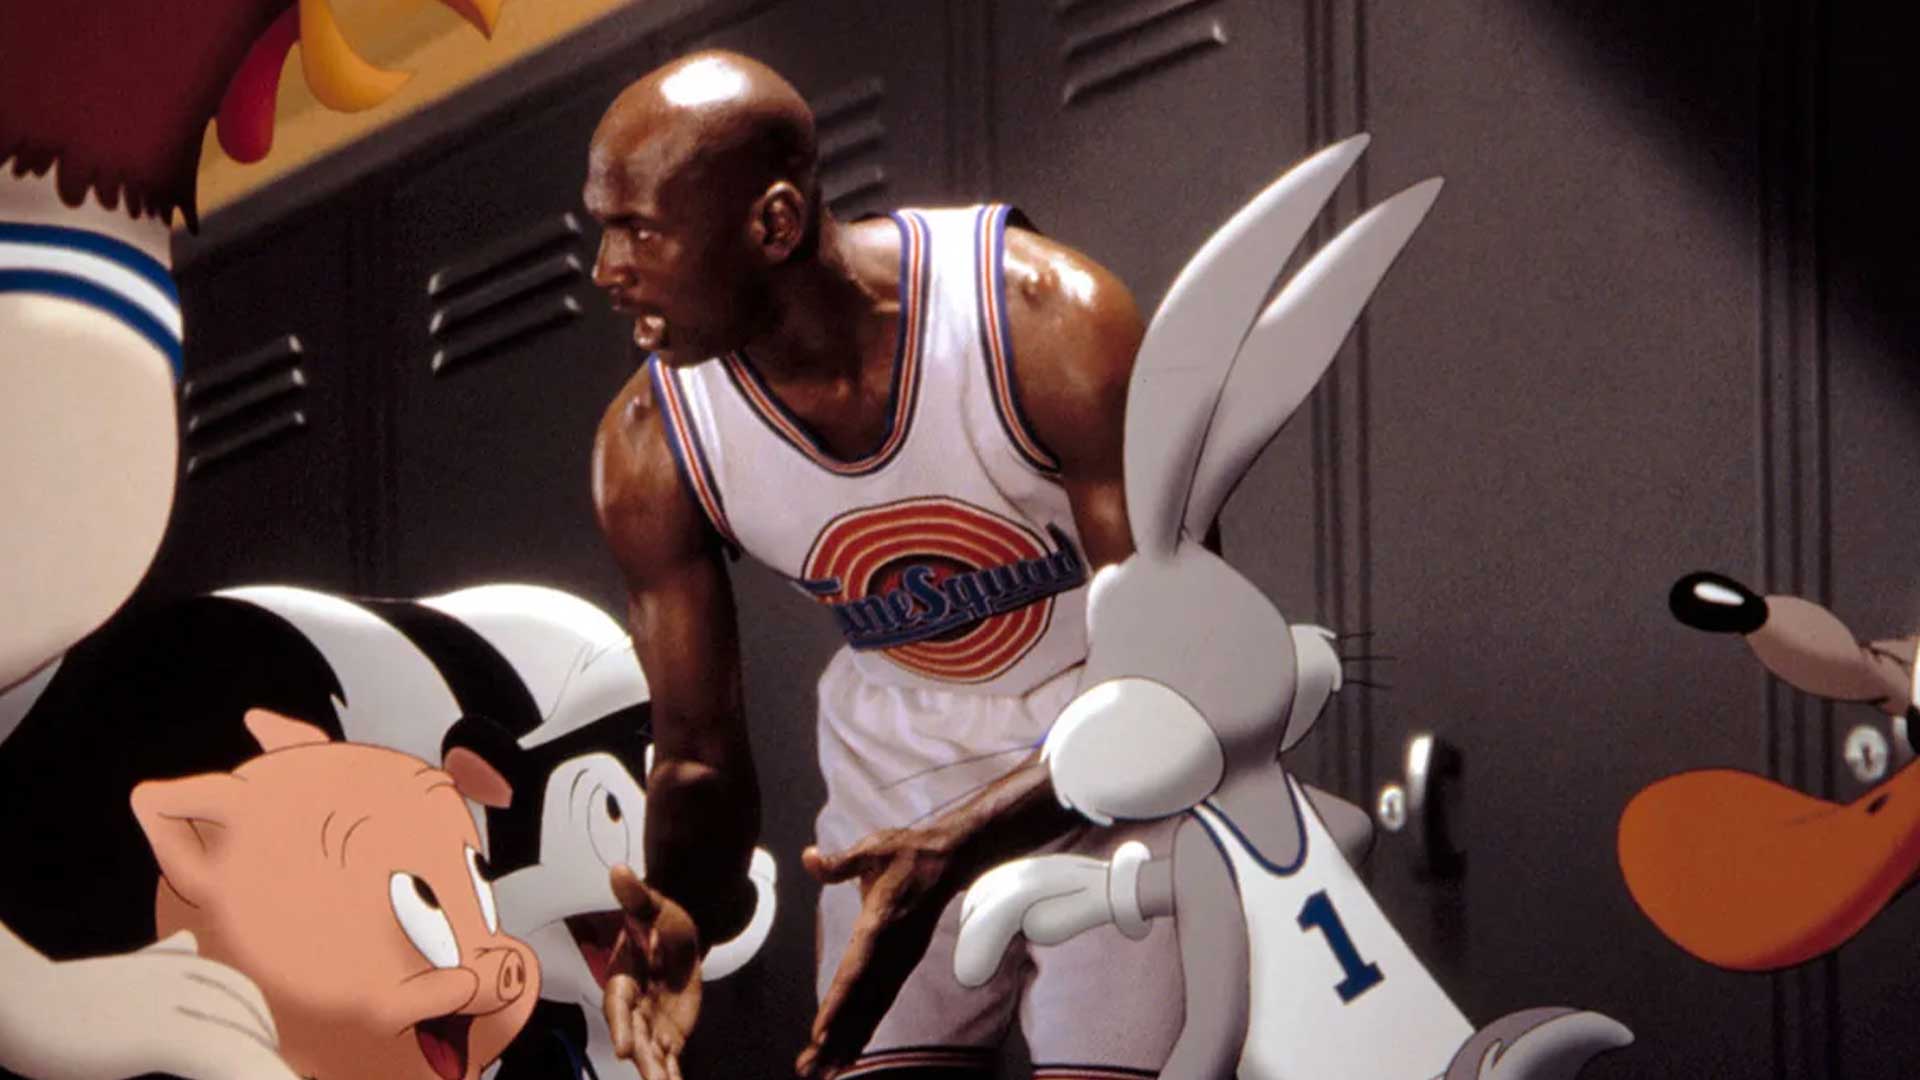 A scene from Space Jam